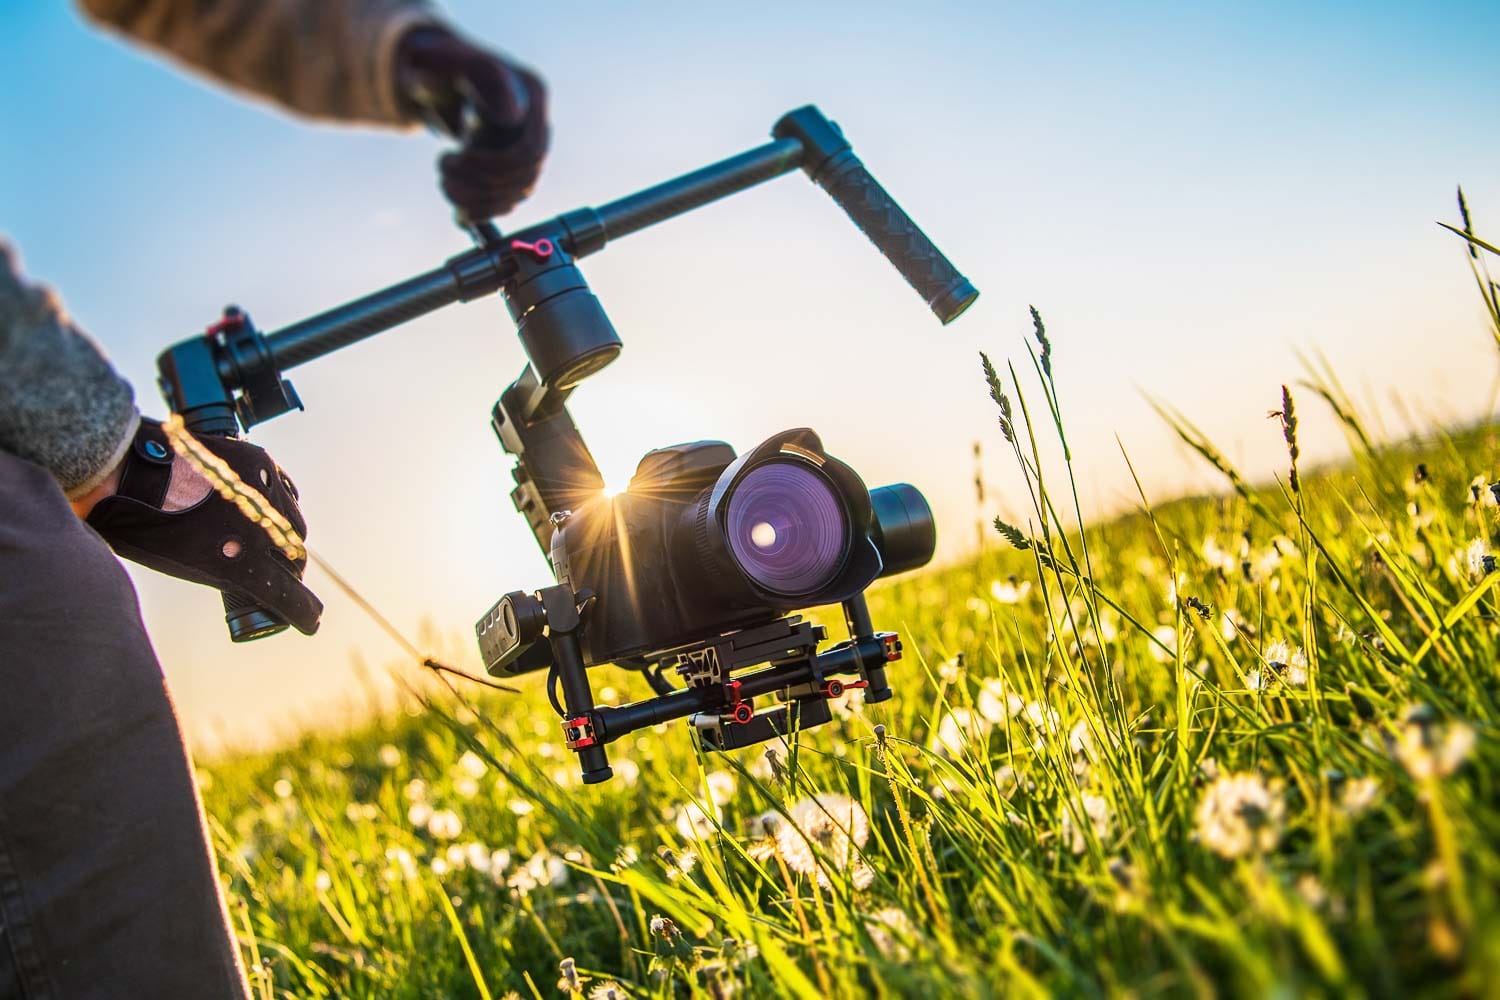 A filmmaker operating a camera on a stabilizing gimbal during a field shoot at sunset.